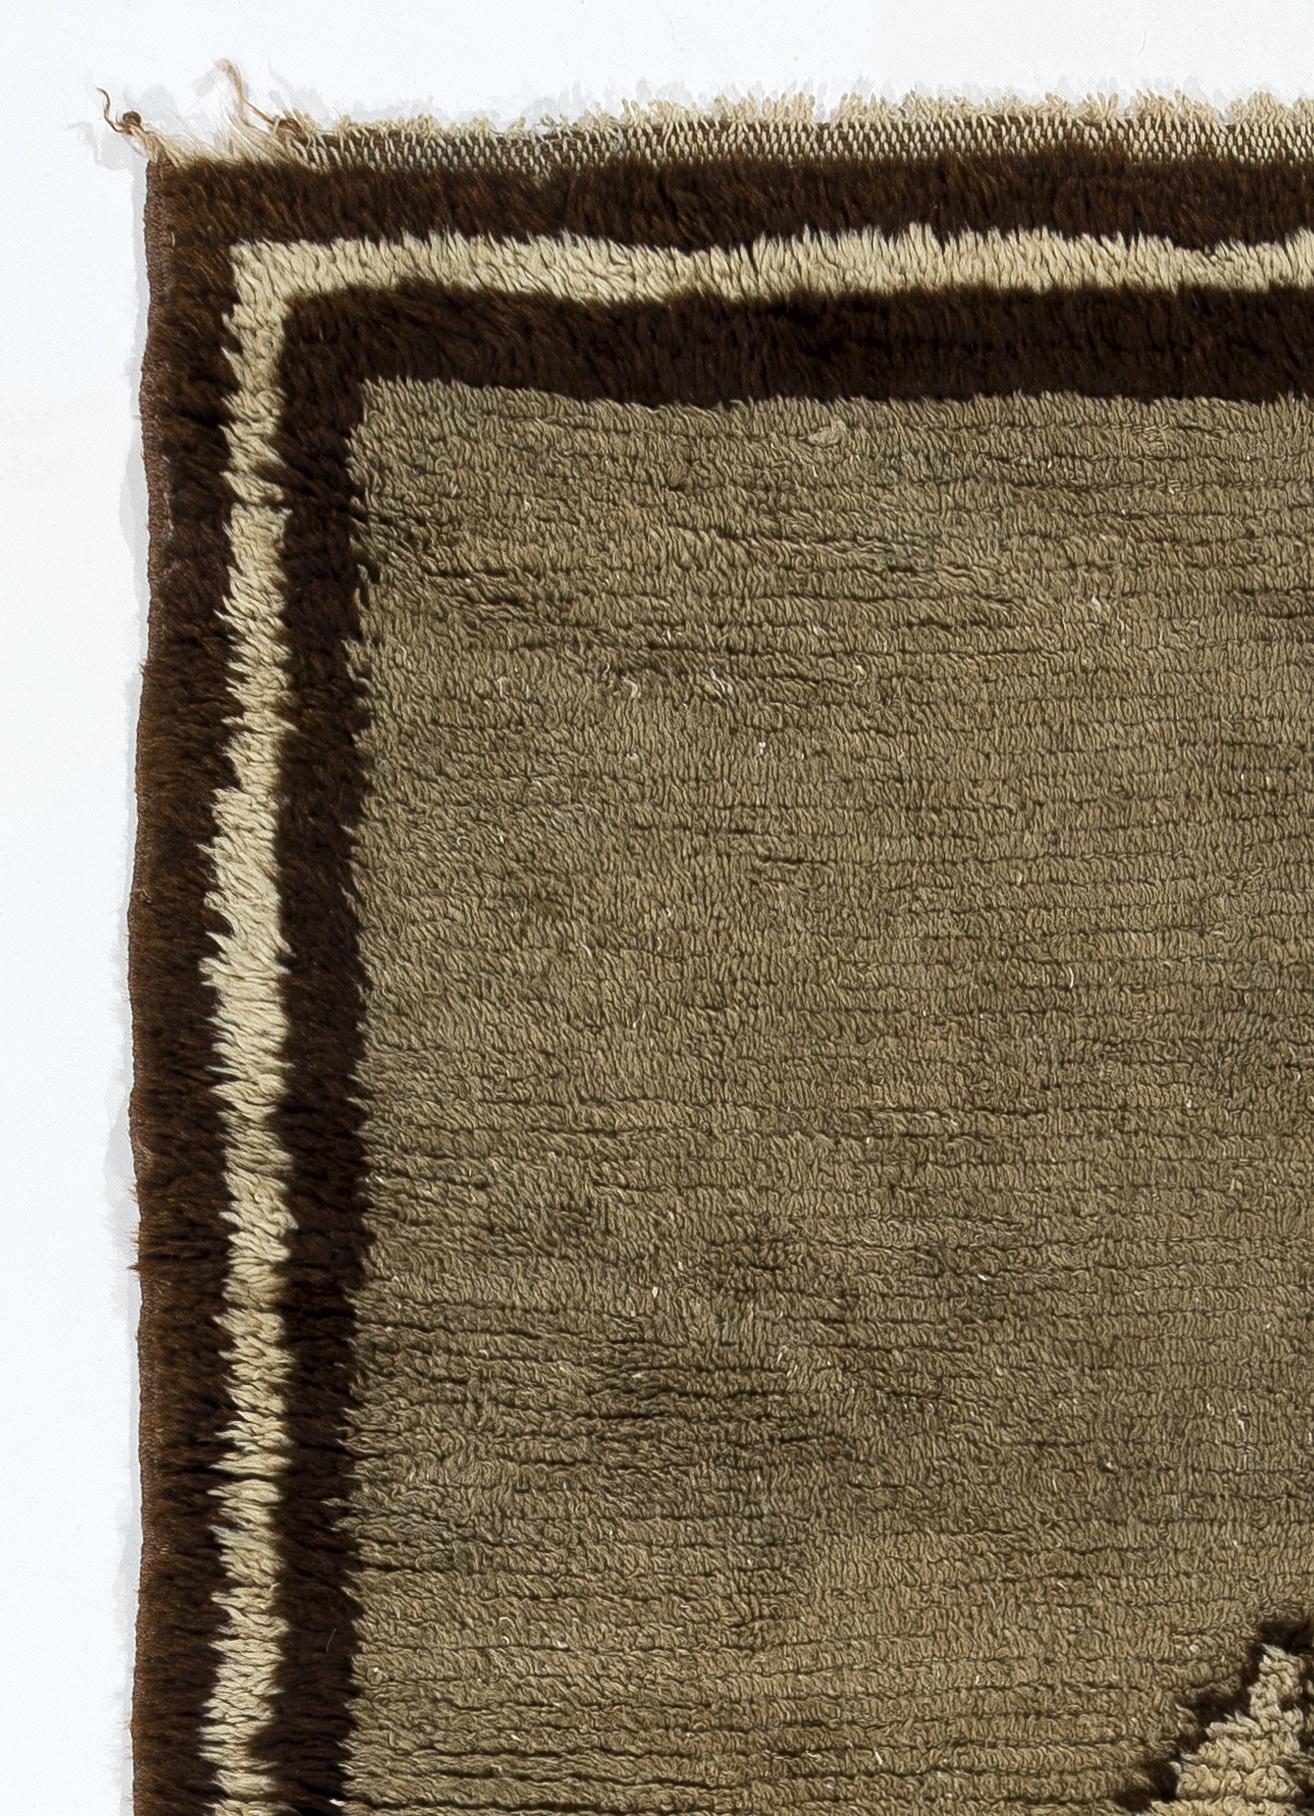 Hand-Knotted 3.7x5 Ft Tulu Rug with a Four Leafed Clover. All Natural Gray, Brown, Beige Wool